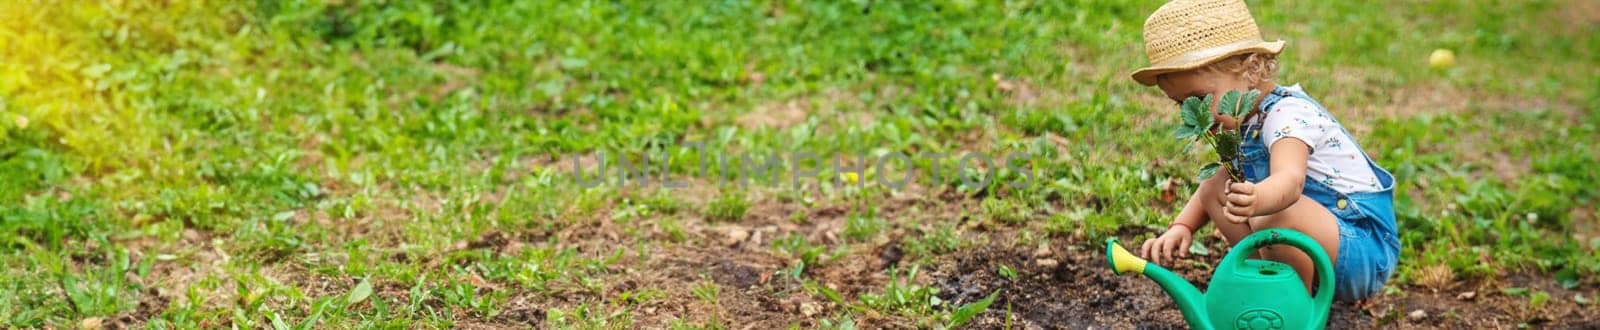 a child plants strawberries in the garden. Selective focus. by yanadjana